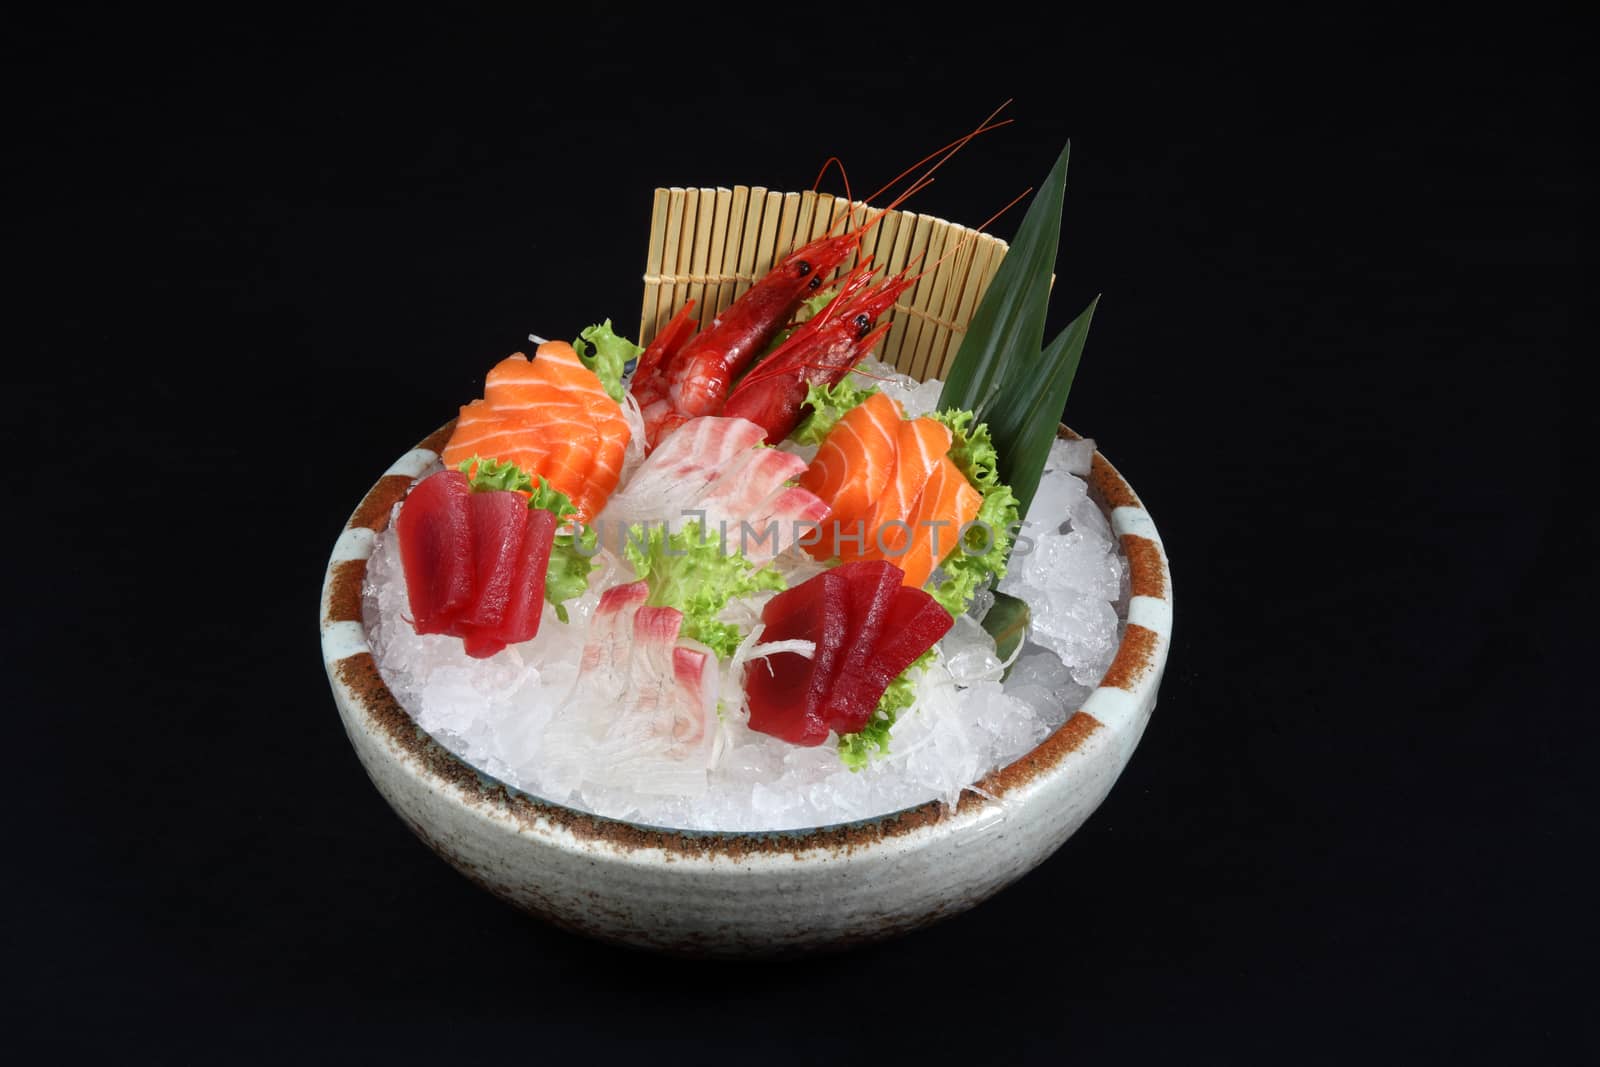 sushi mixed with ice by diecidodici